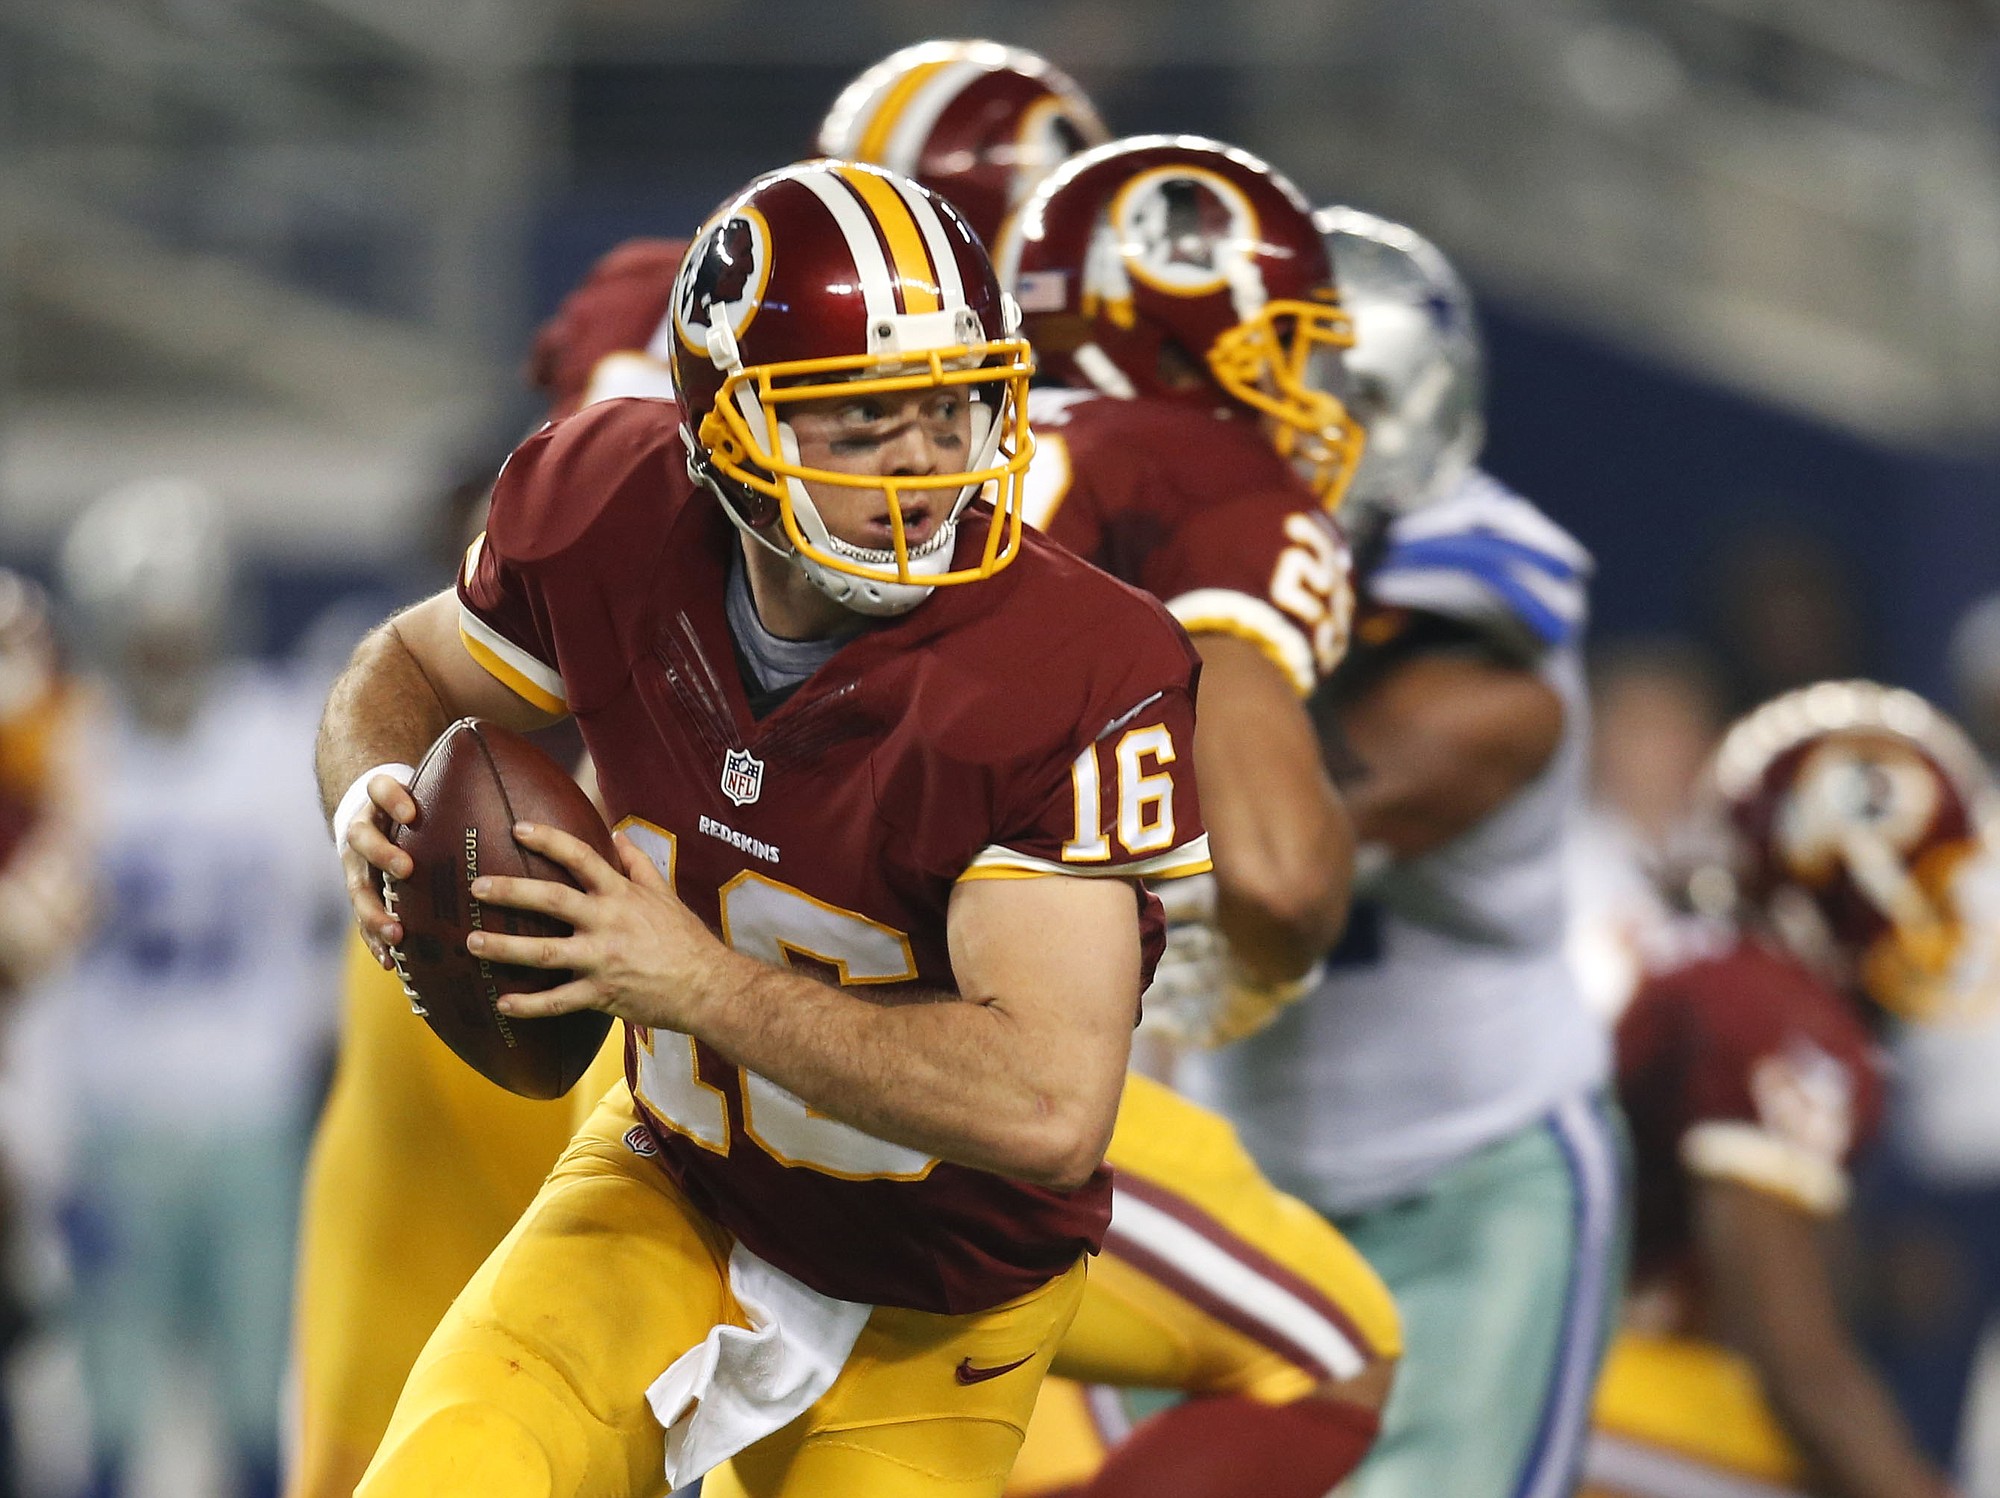 Washington Redskins' Colt McCoy (16) scrambles out of the pocket during the second half against the Dallas Cowboys, Monday, Oct. 27, 2014, in Arlington, Texas.